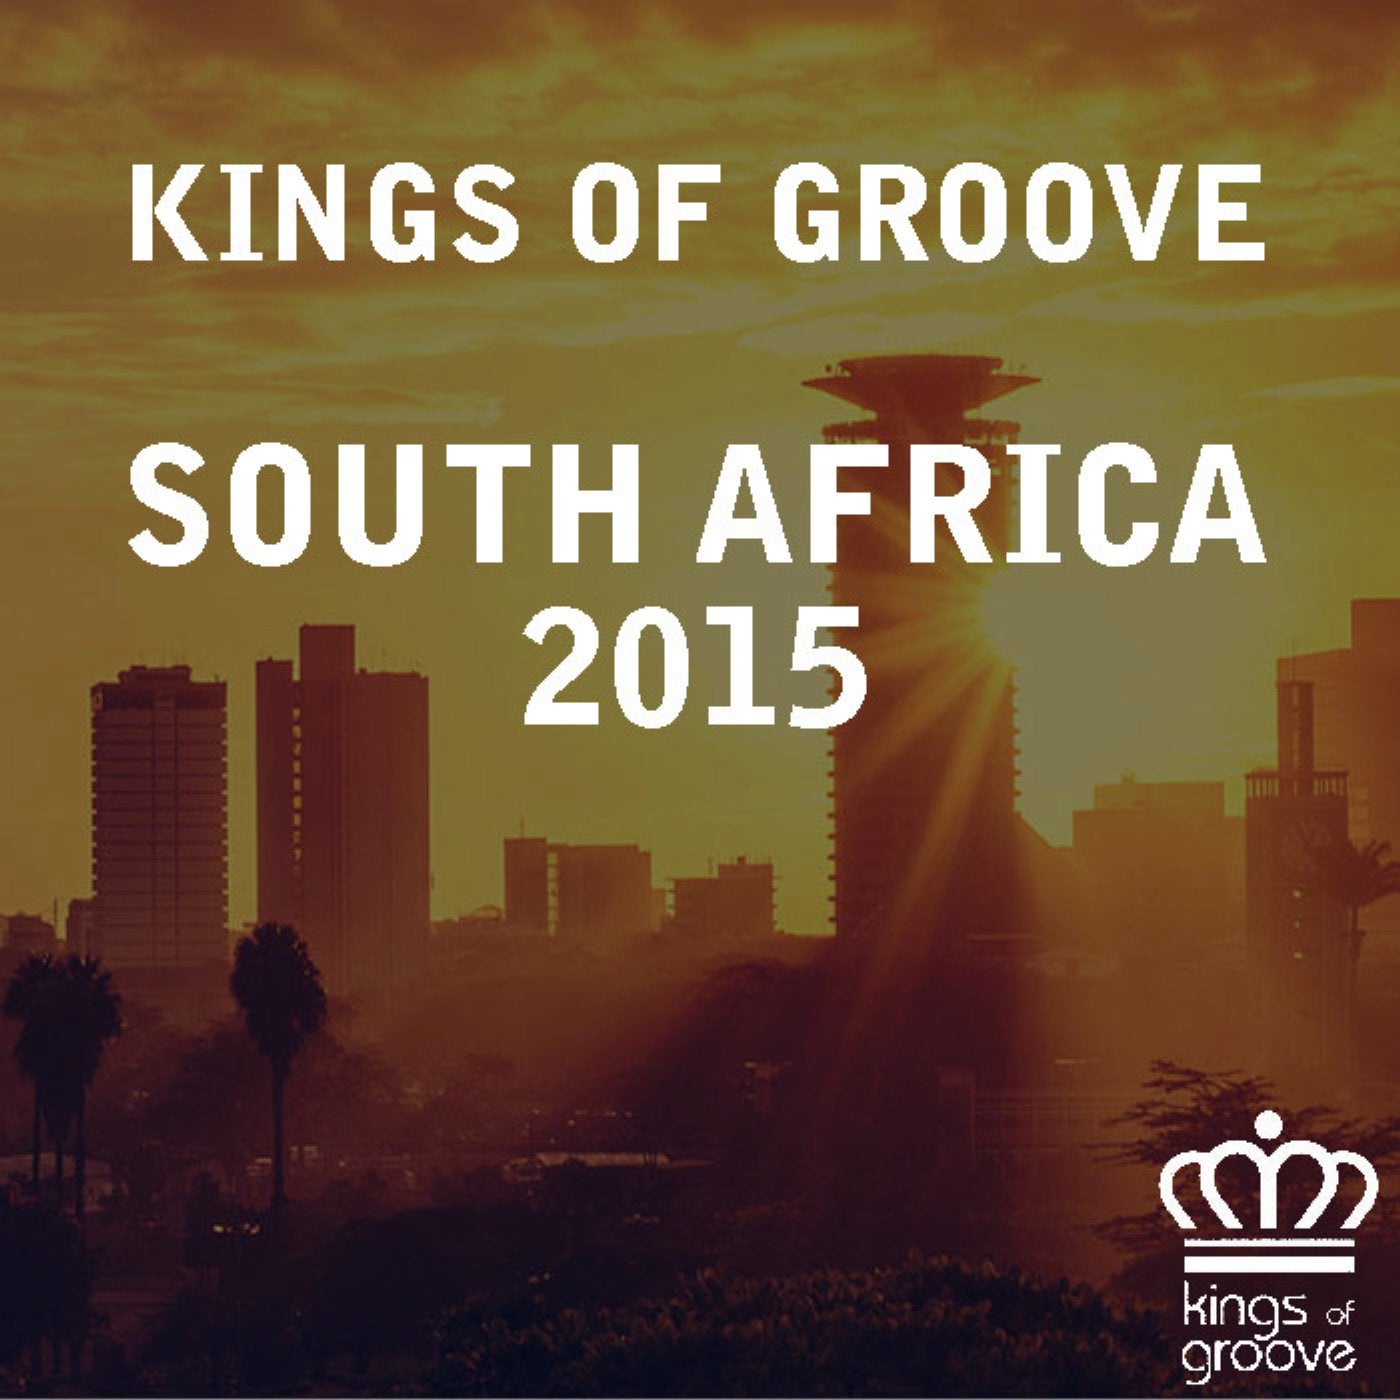 KINGS OF GROOVE SOUTH AFRICA 2015